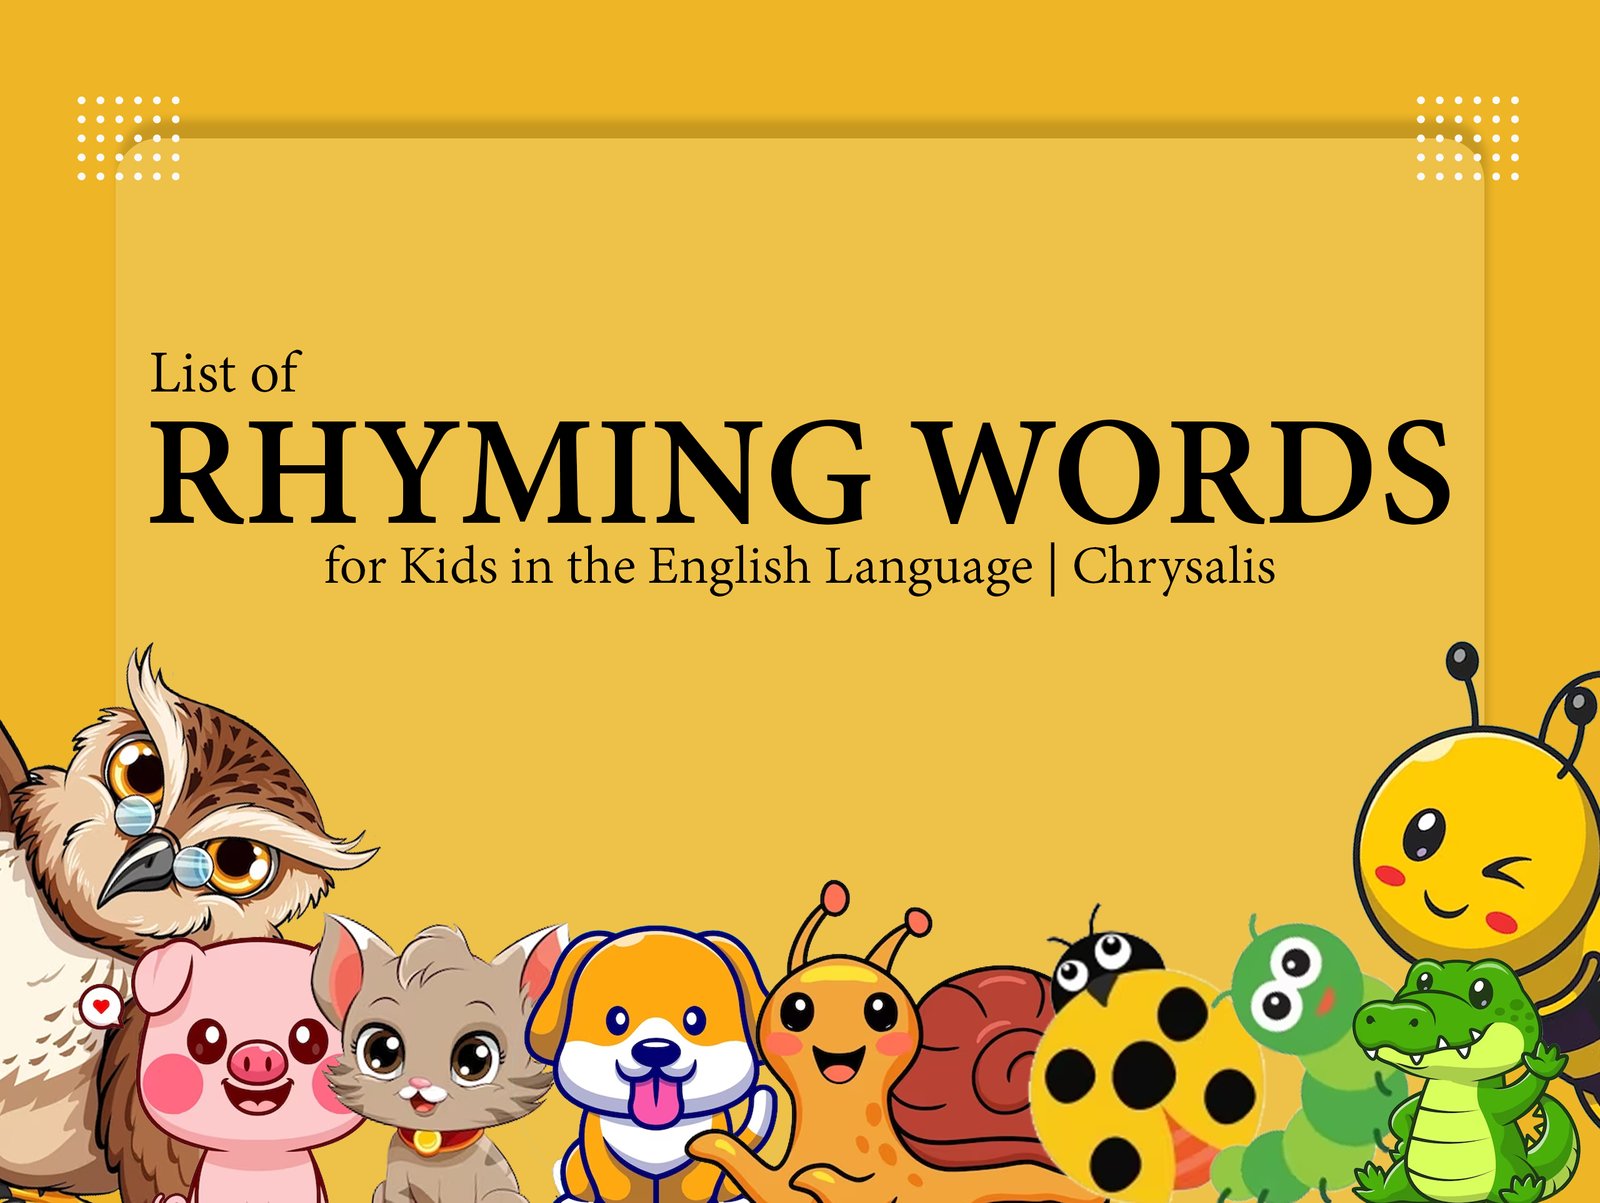 List of Rhyming Words poster